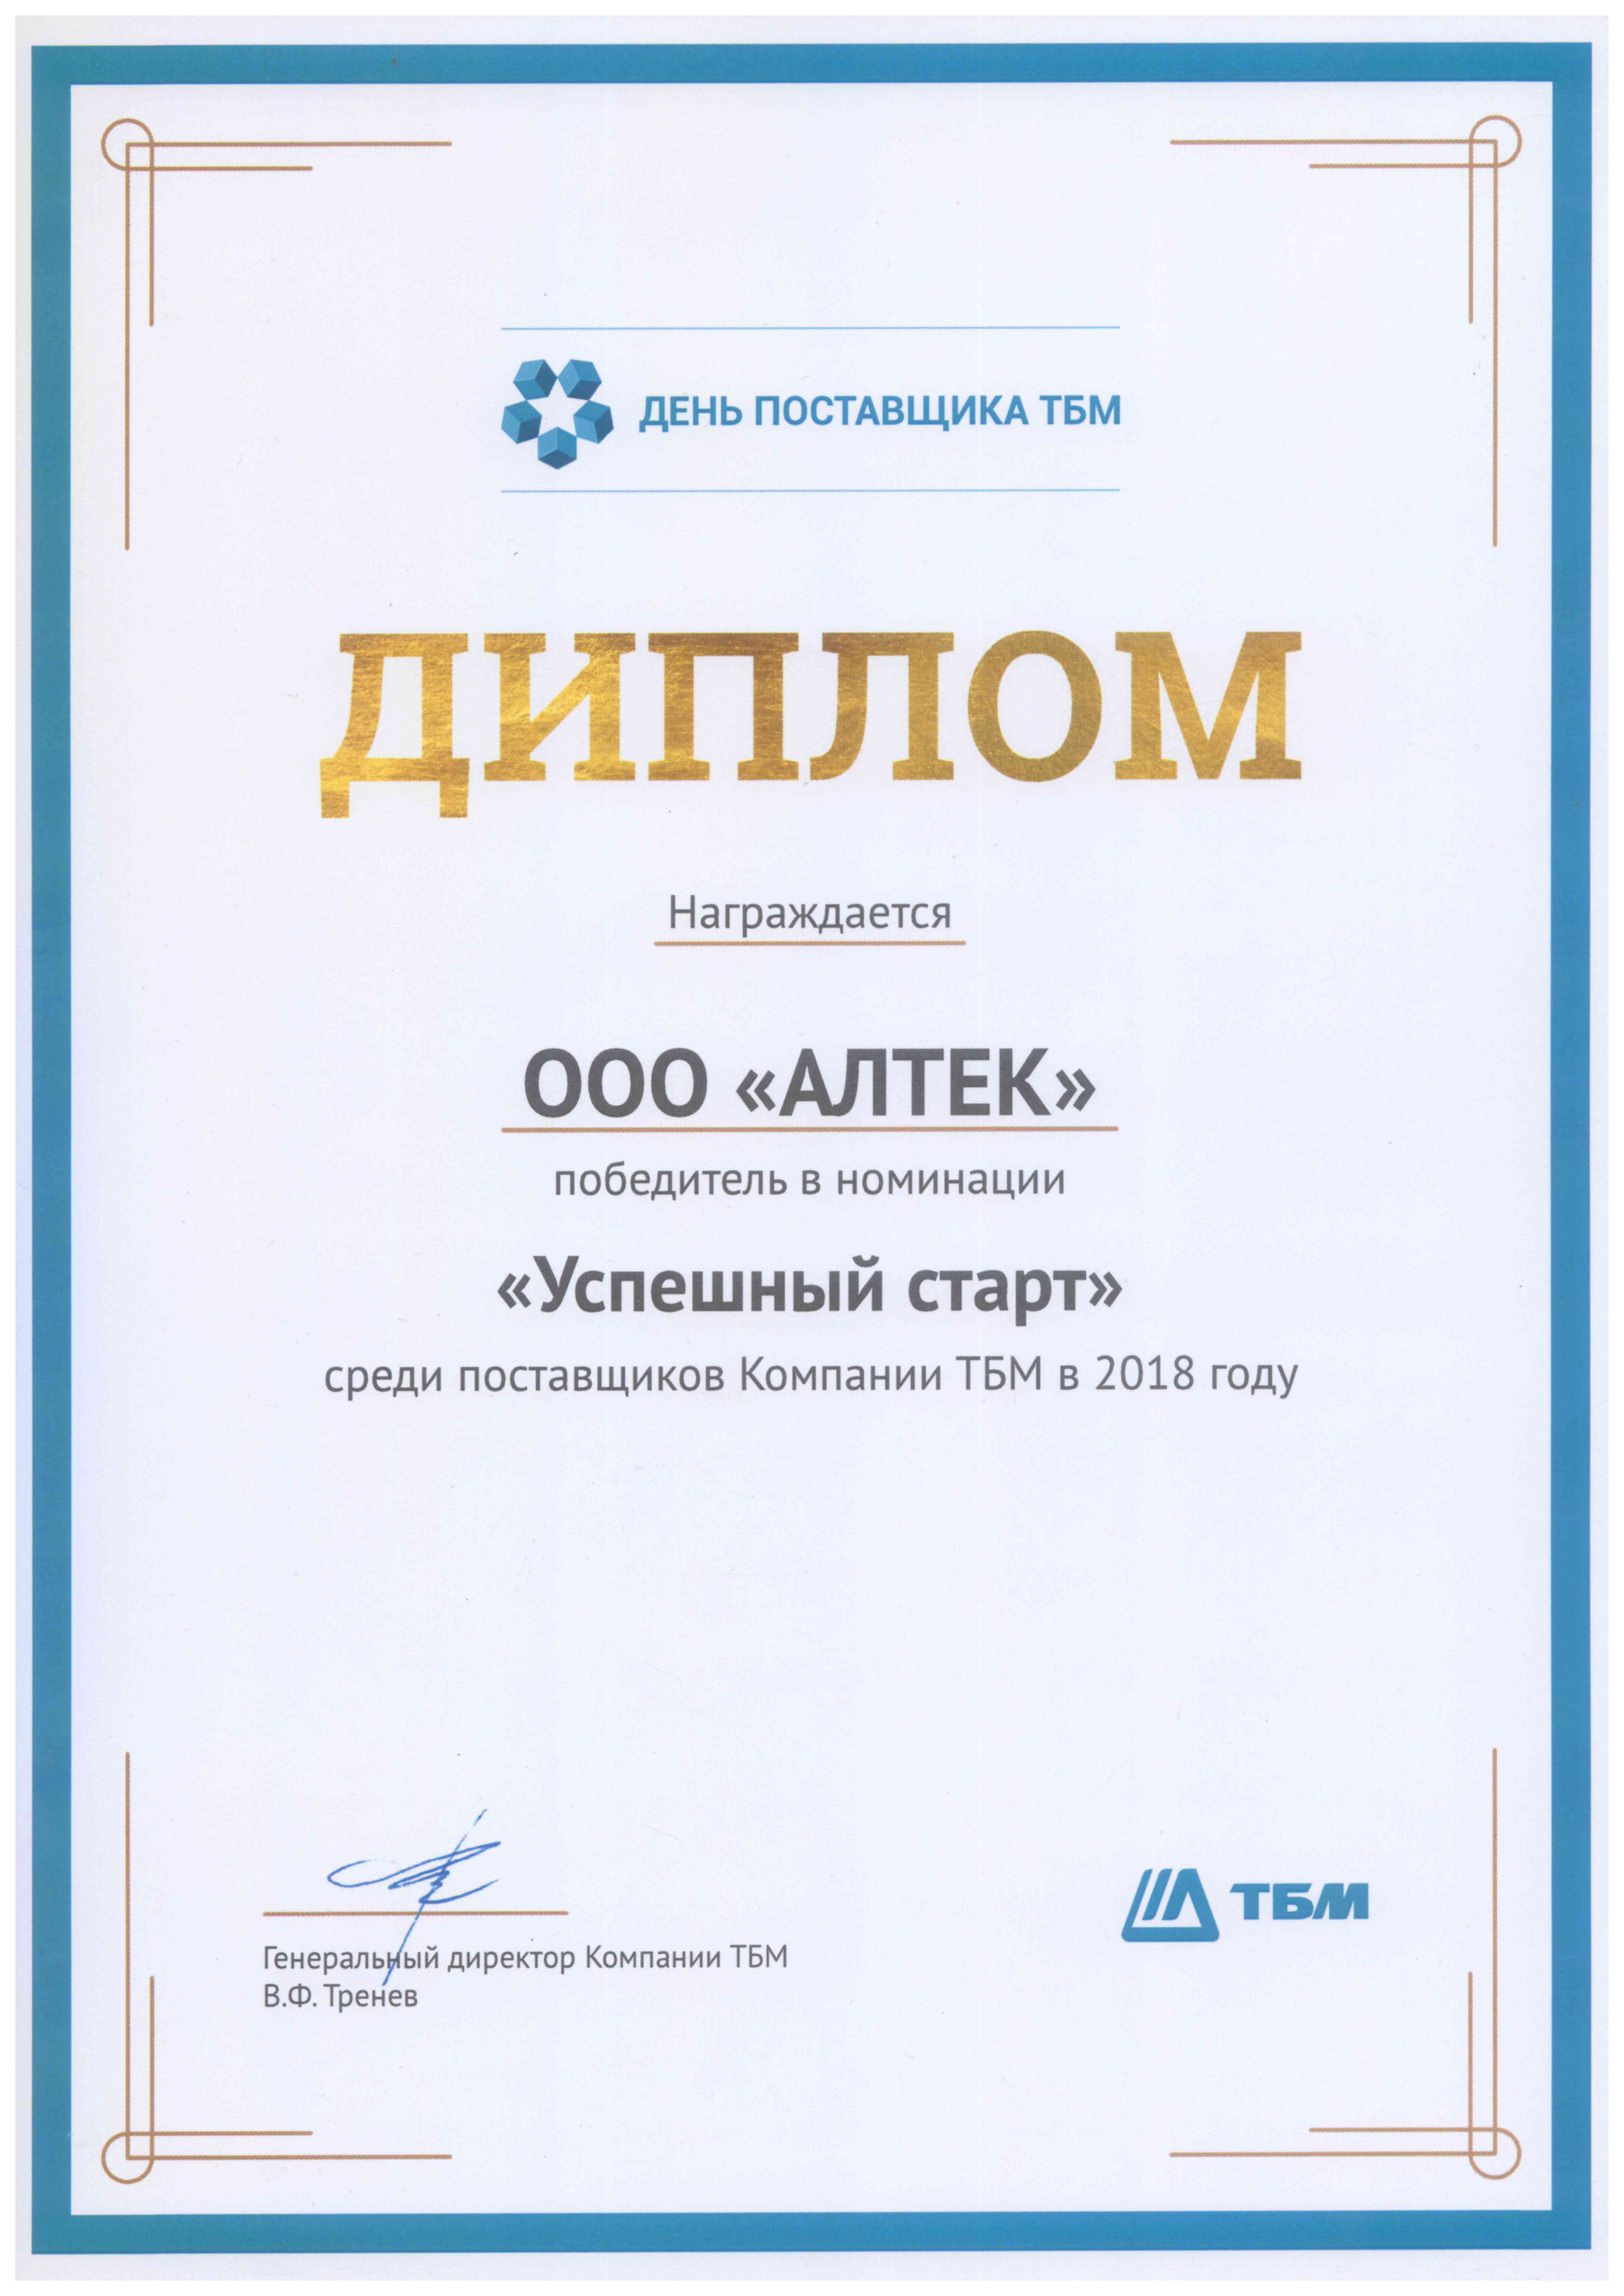 Winner in the Successful Start nomination among TBM suppliers in 2018.